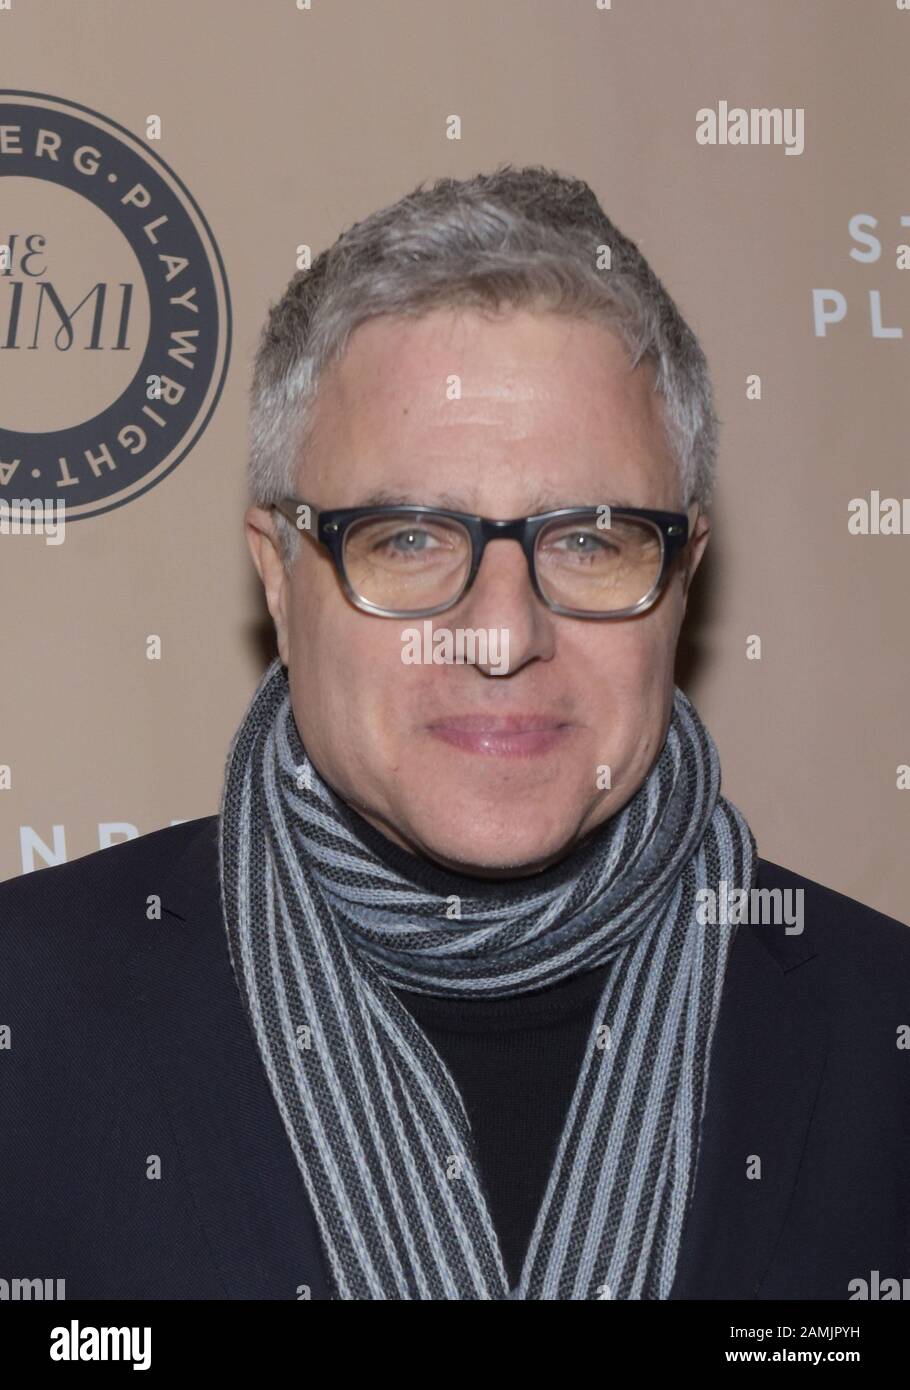 NEW YORK, NEW YORK - JANUARY 13: Neil Pepe attends 2019 Steinberg Playwright Awards at Lincoln Center Theater, Mitzi E. Newhouse Theater January 13, 2020 in New York City. Photo: Jeremy Smith/imageSPACE Stock Photo